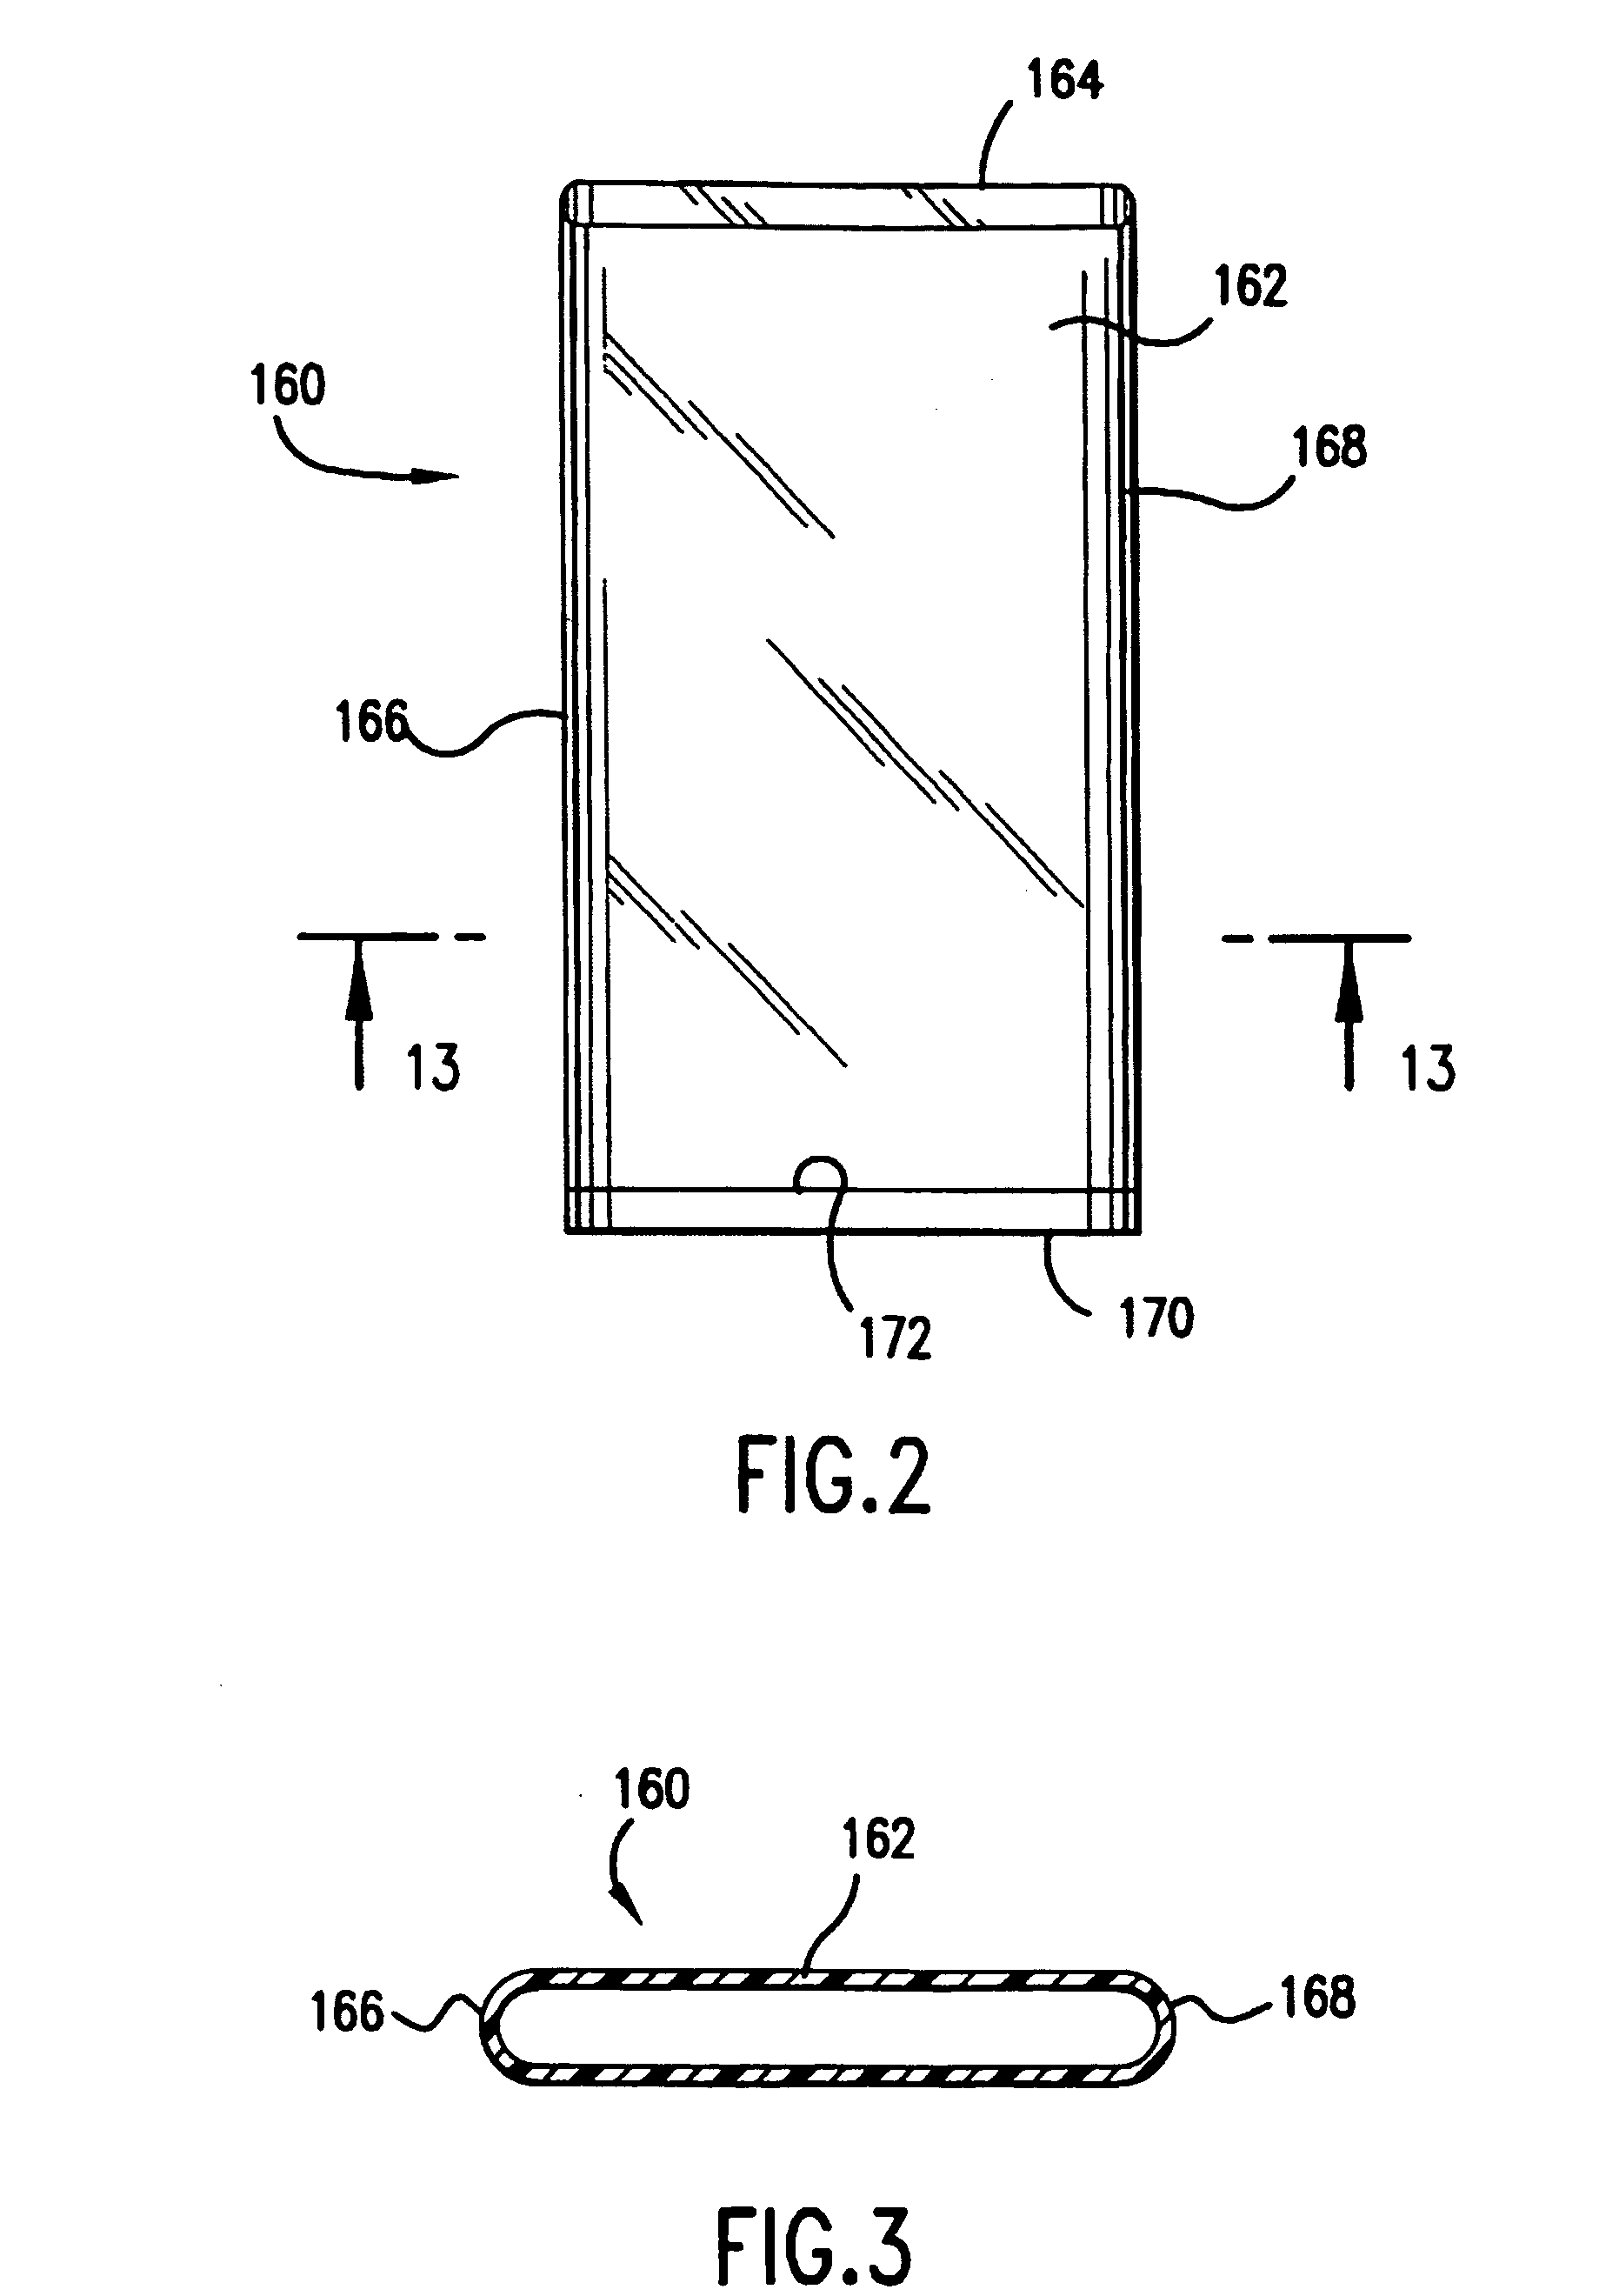 Vacuum packaging of a meat product using a film having a carbon dioxide scavenger